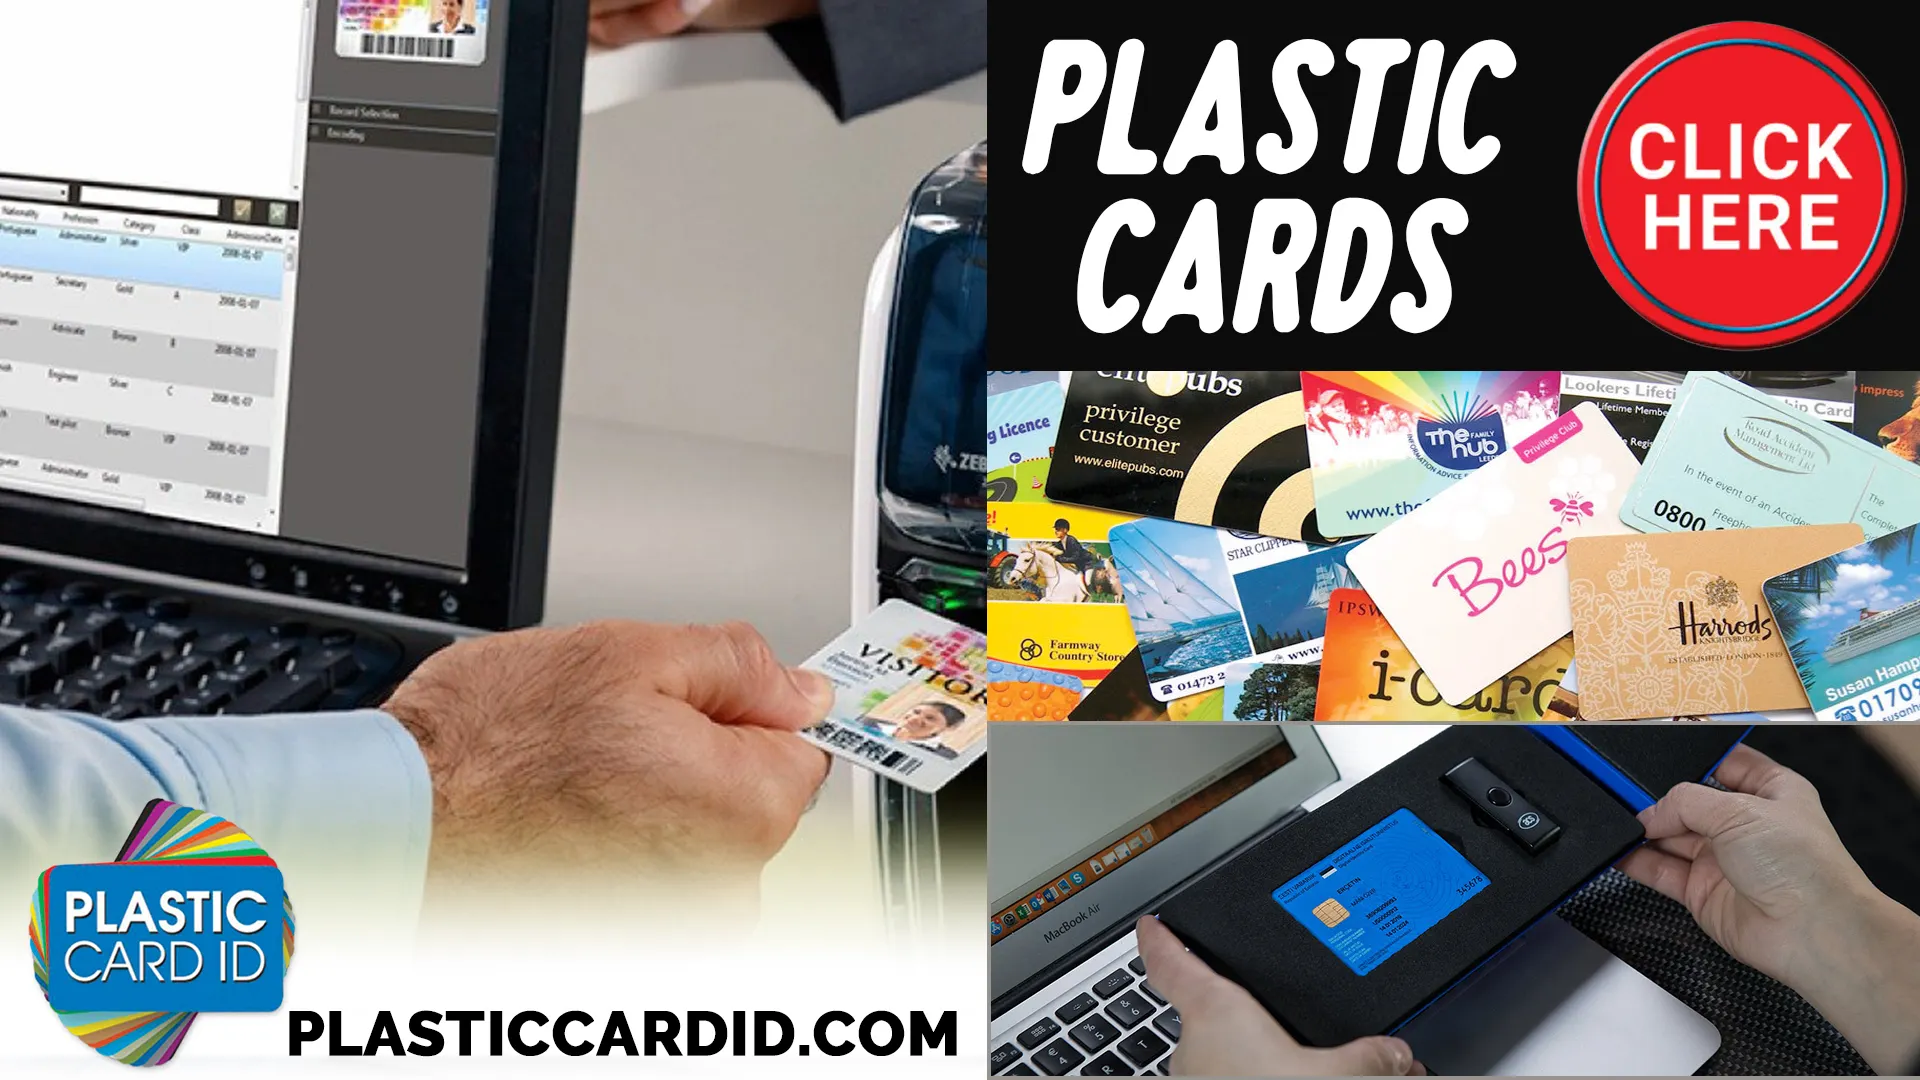 Welcome to Plastic Card ID




: Your Gateway to Distinctive Branding with Plastic Cards